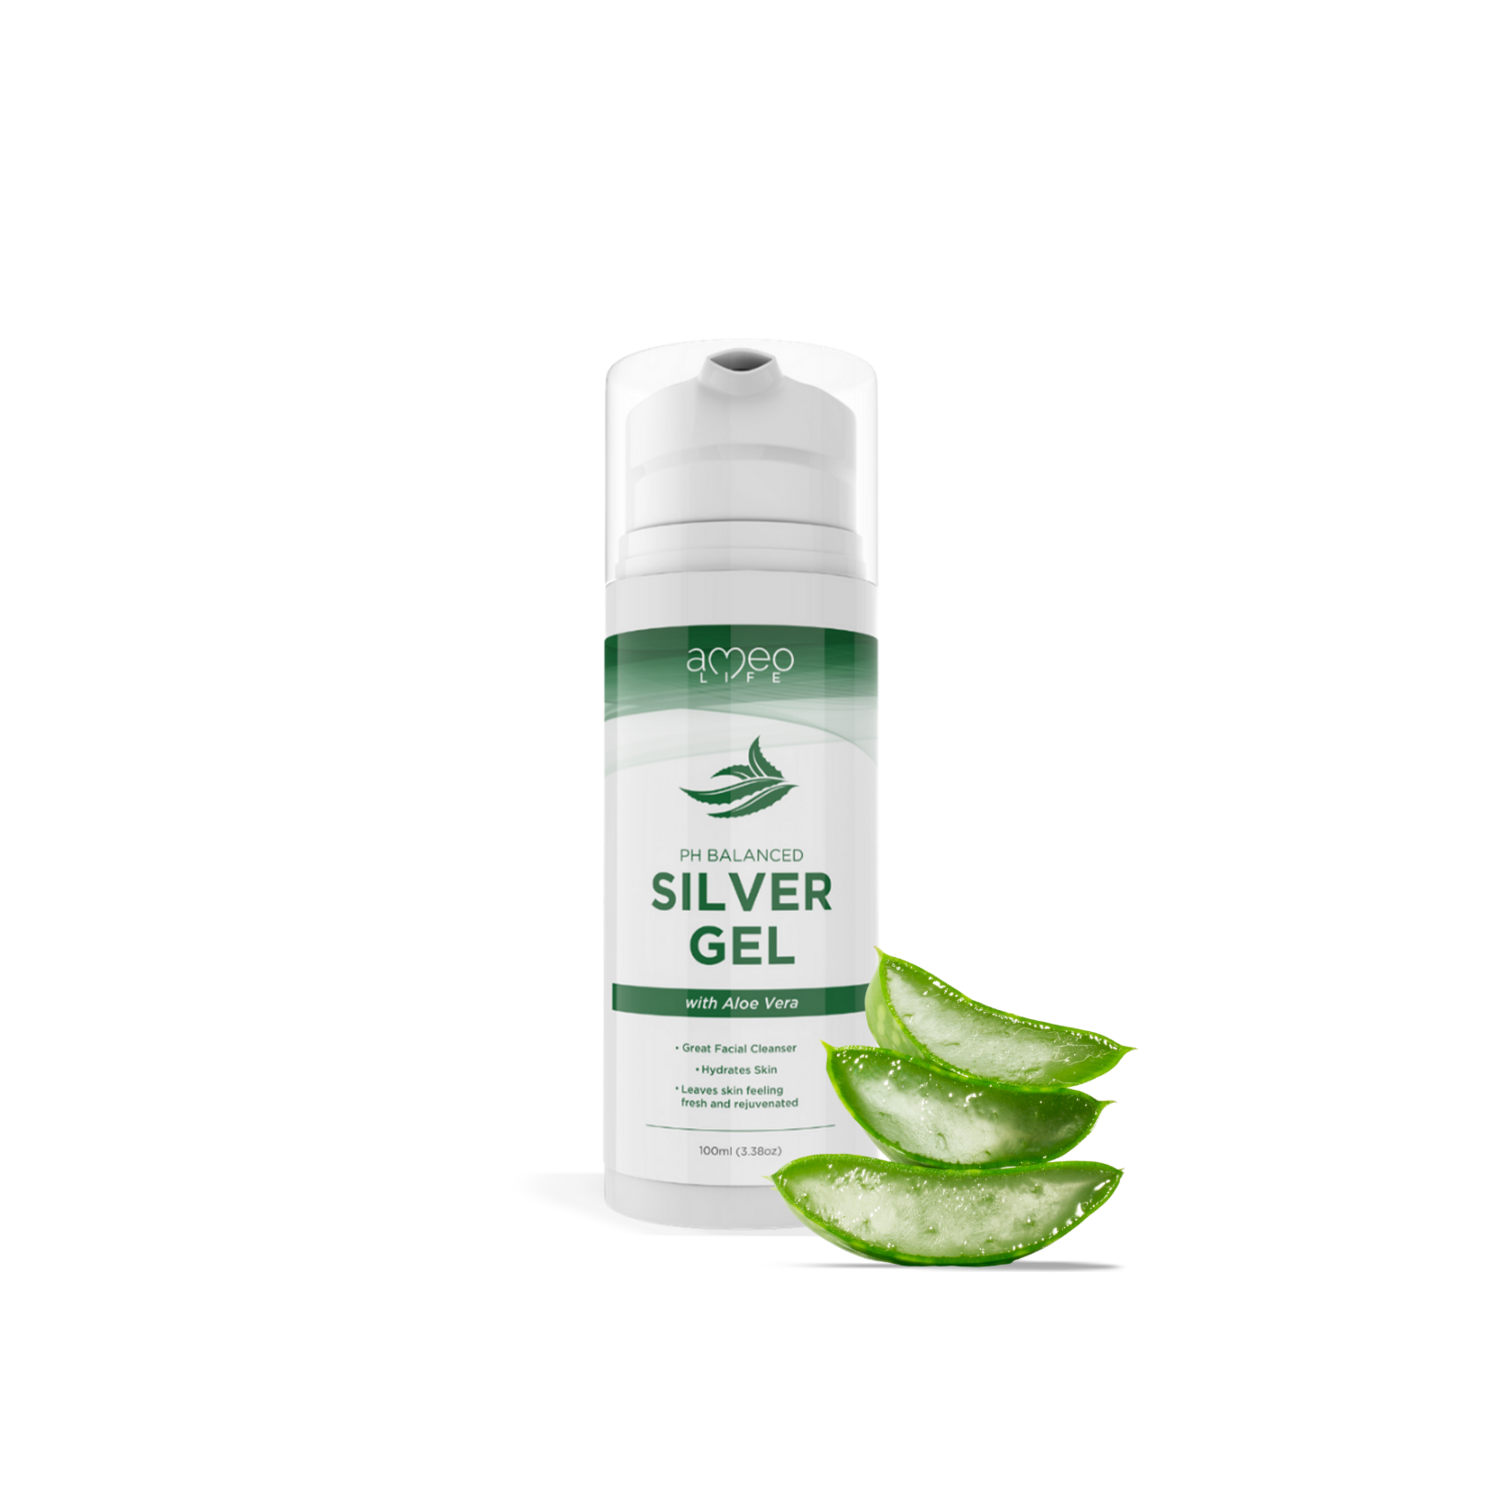 SILVER INFUSED GEL with Aloe Vera